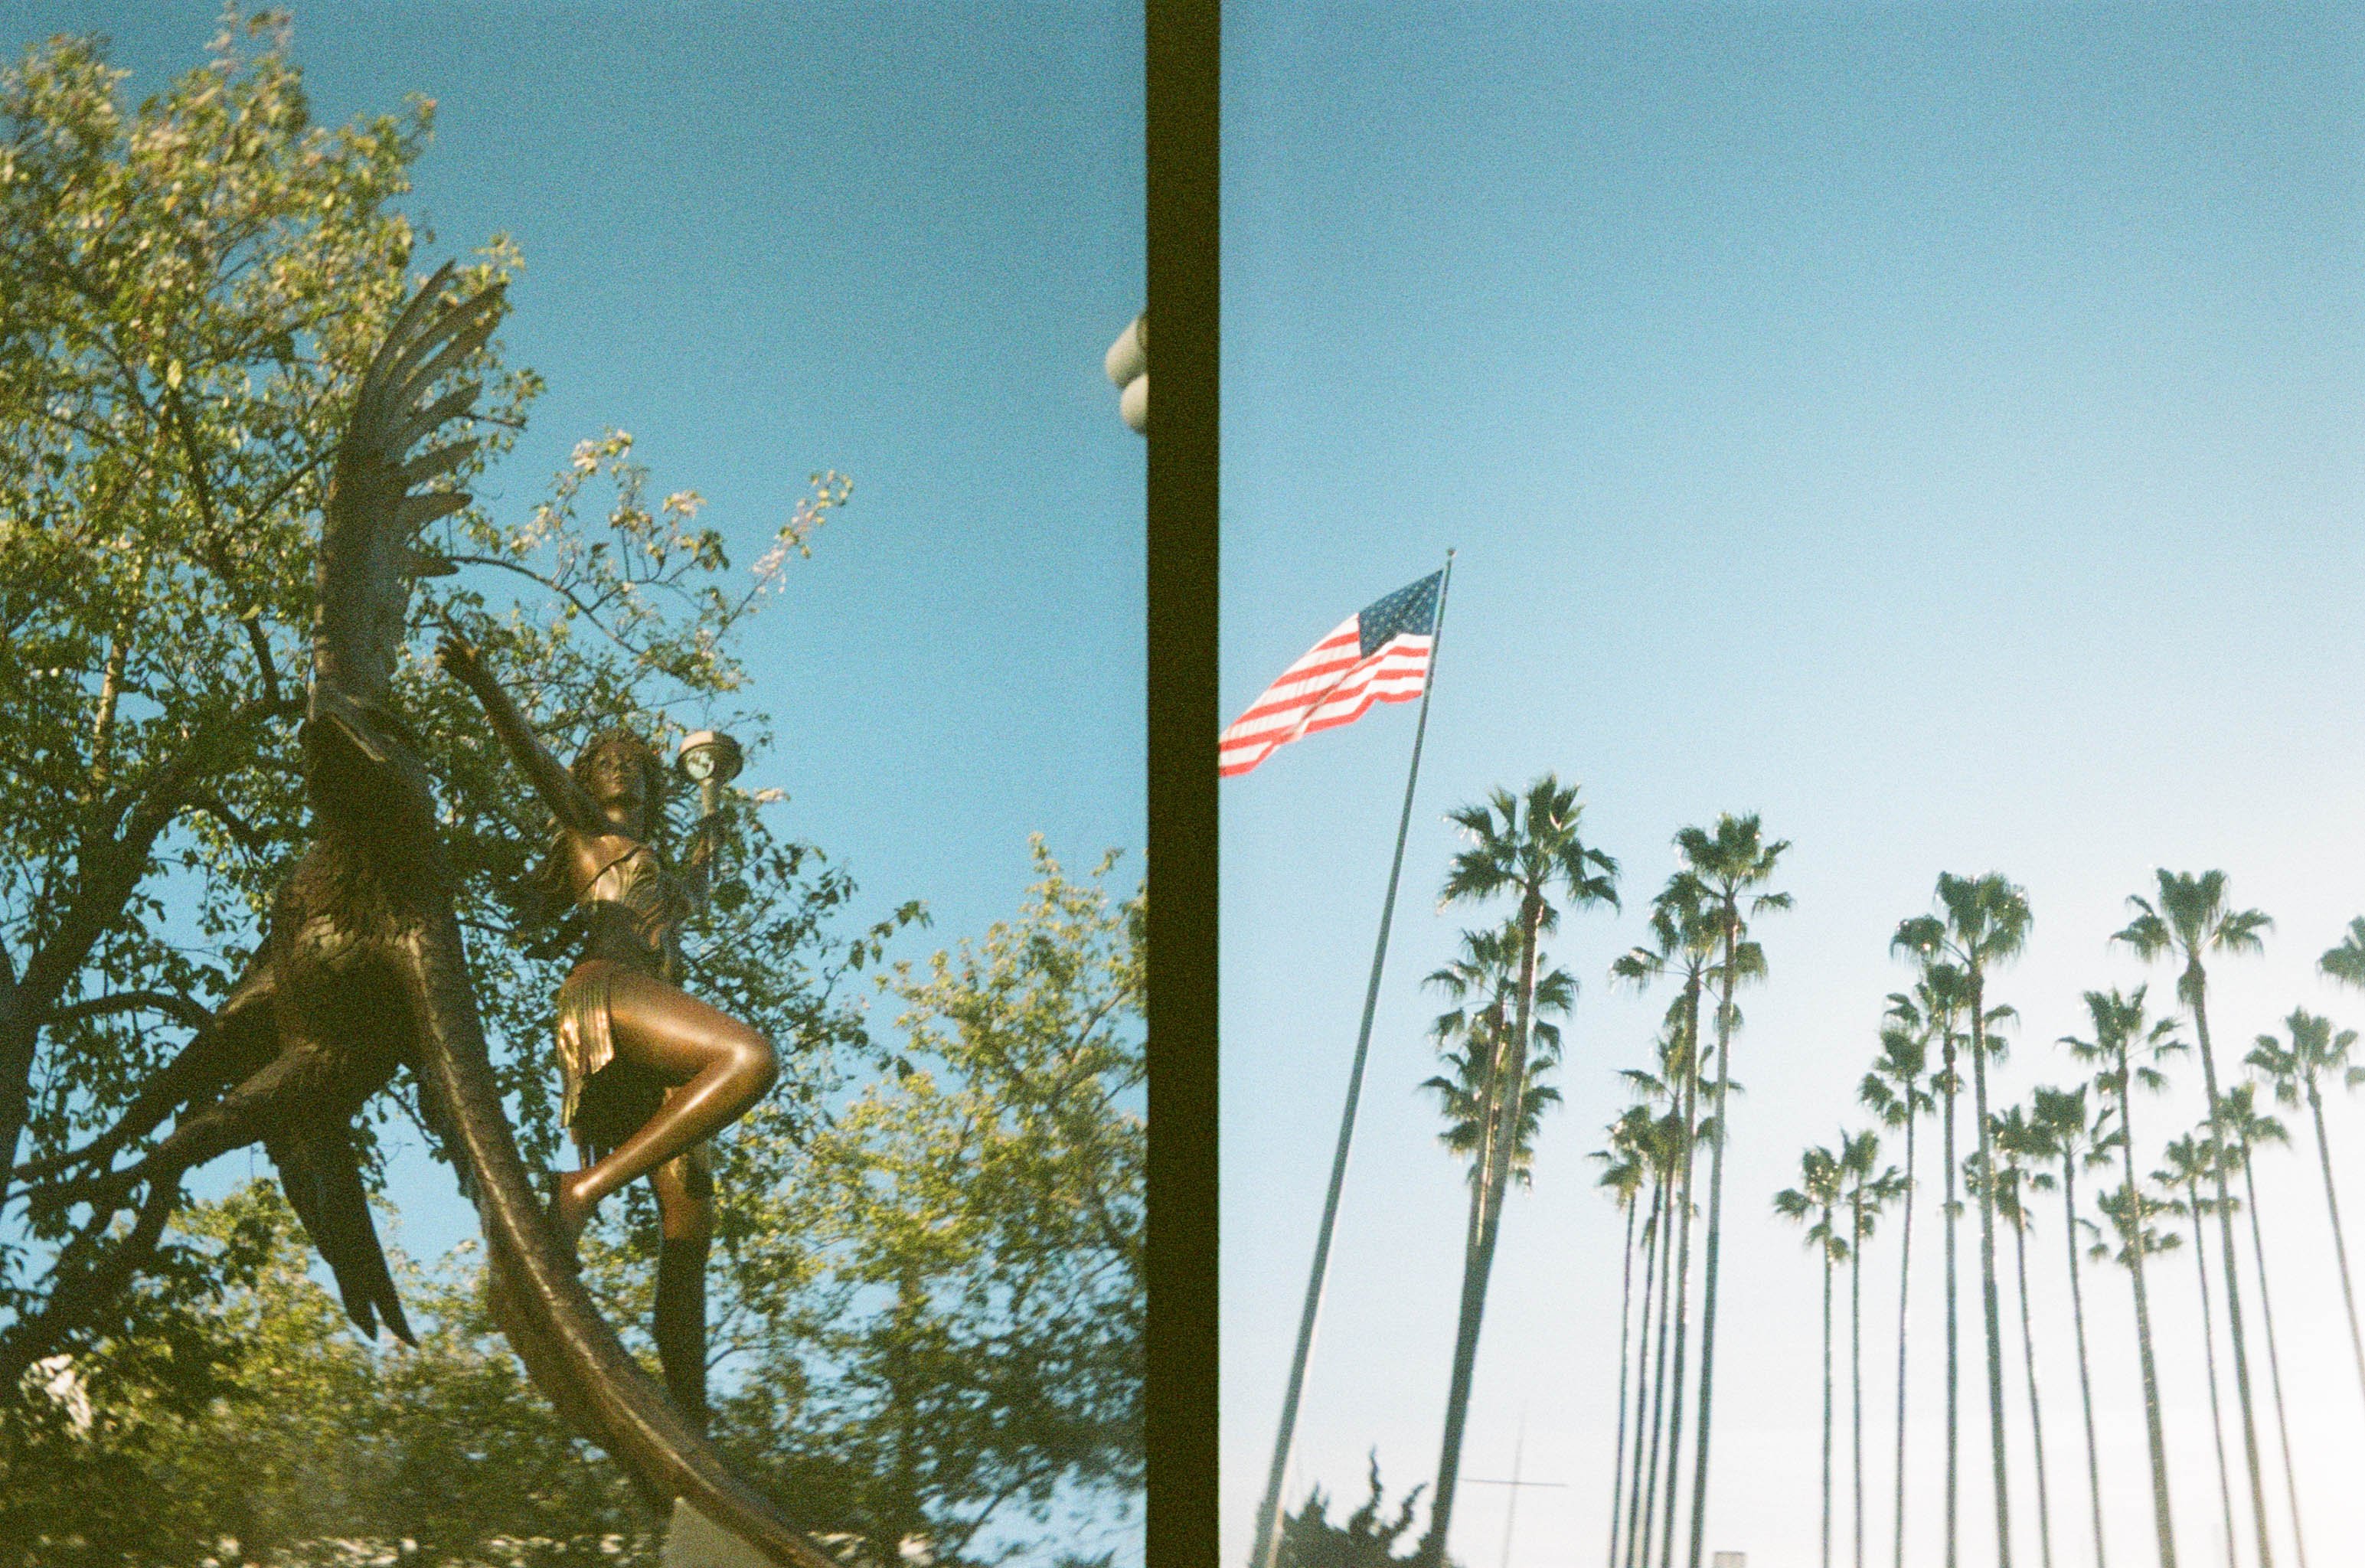 A 35mm film photo frame with two exposures. The first photo is a statue of a woman and an eagle flying beside her with a tree behind them. The second photo is an American flag flying with palm trees in the distance